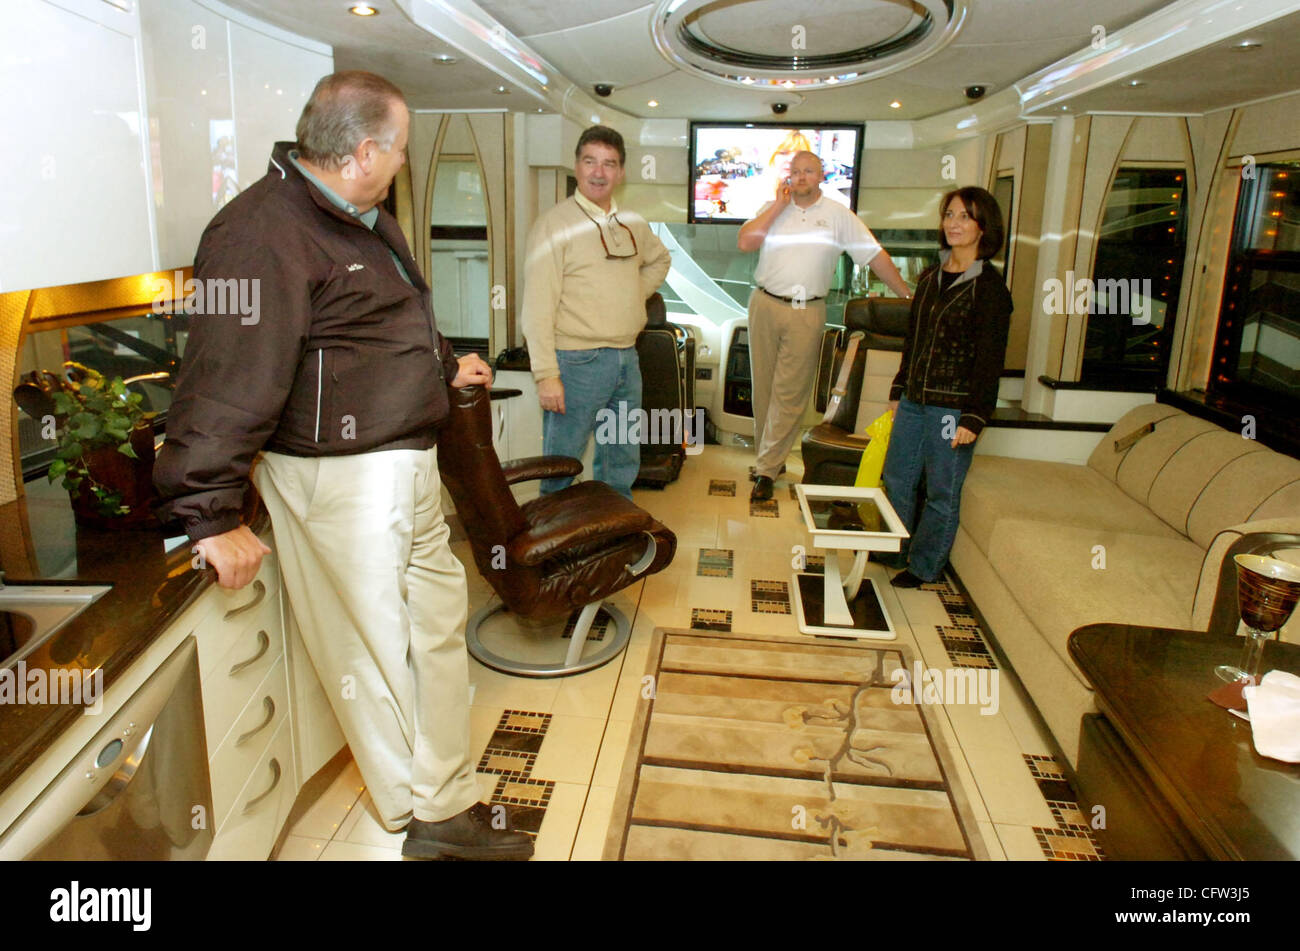 (from left) Renold Victor, owner of Sacramento Country Coach, Rod Lowe of Modesto, Calif., Jeff Howe, with Country Coach and Karen Lowe of Modesto, Calif., talk about the 1.3 million dollar  Country Coach RV for sale at the 2007 Manufacturers' RV Show held at the Alameda County Fairgrounds in Pleasa Stock Photo